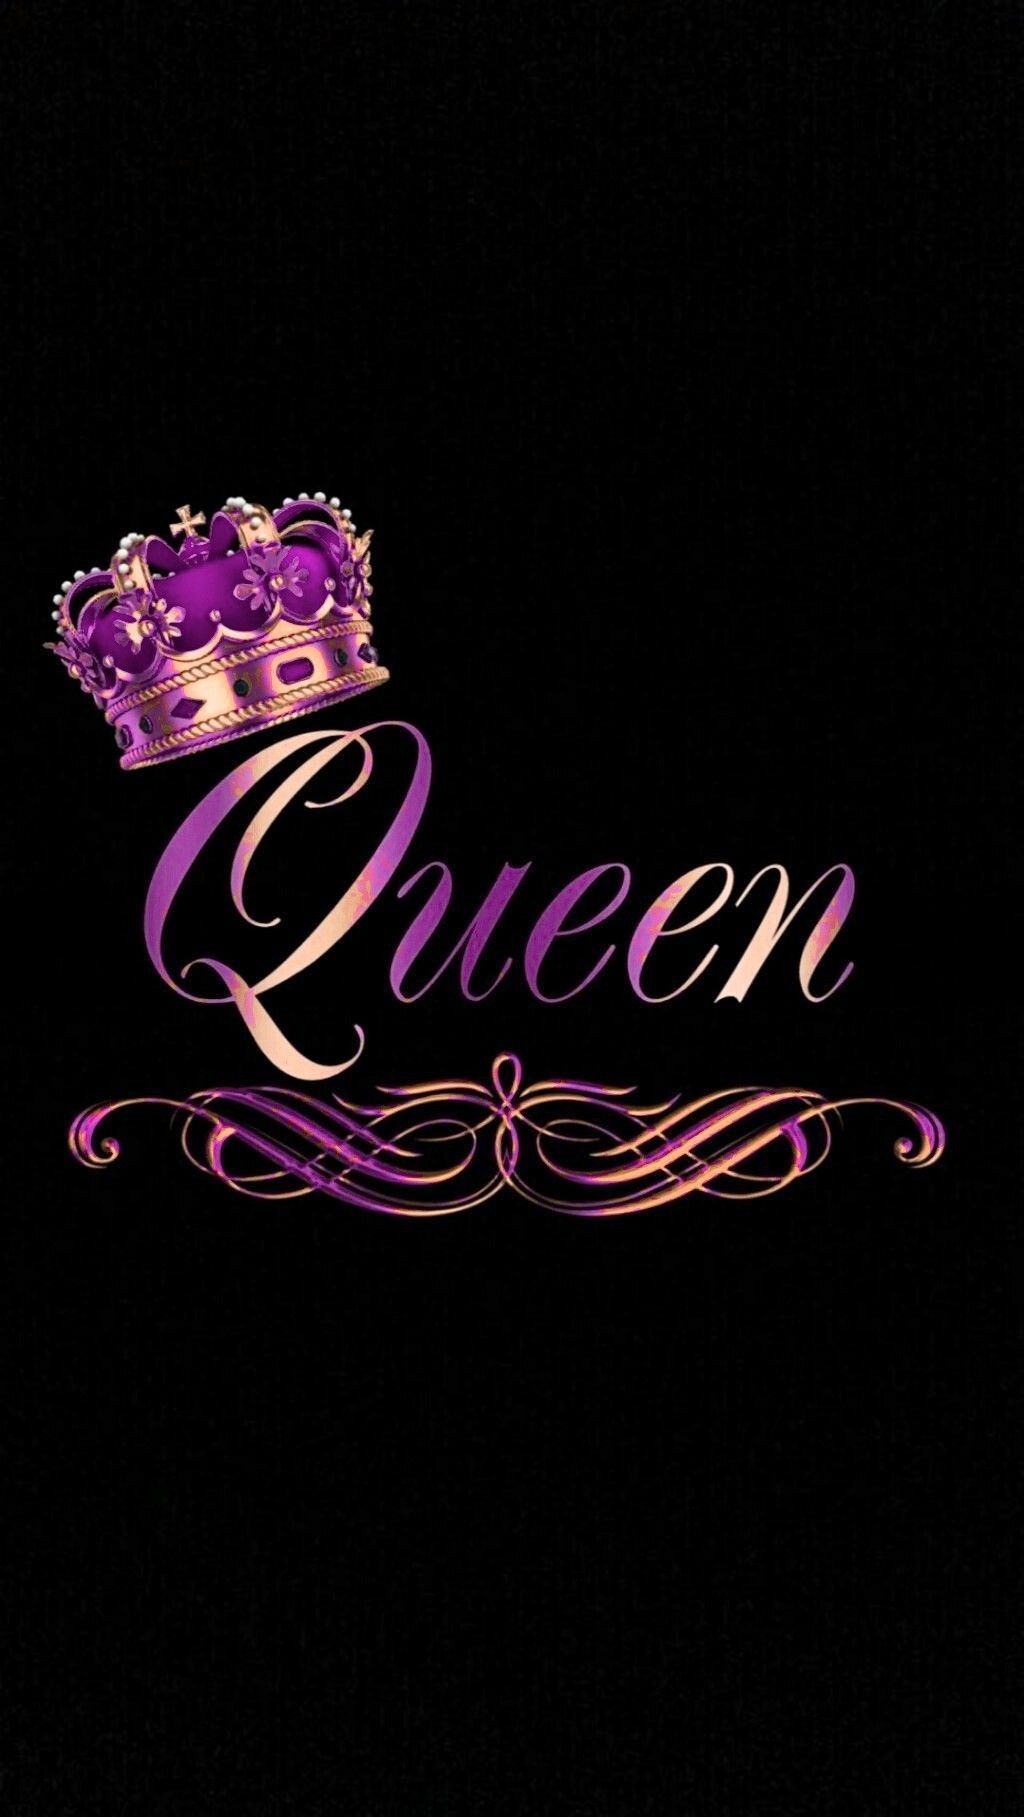 Queen iPhone Wallpaper with high-resolution 1080x1920 pixel. You can use this wallpaper for your iPhone 5, 6, 7, 8, X, XS, XR backgrounds, Mobile Screensaver, or iPad Lock Screen - Crown